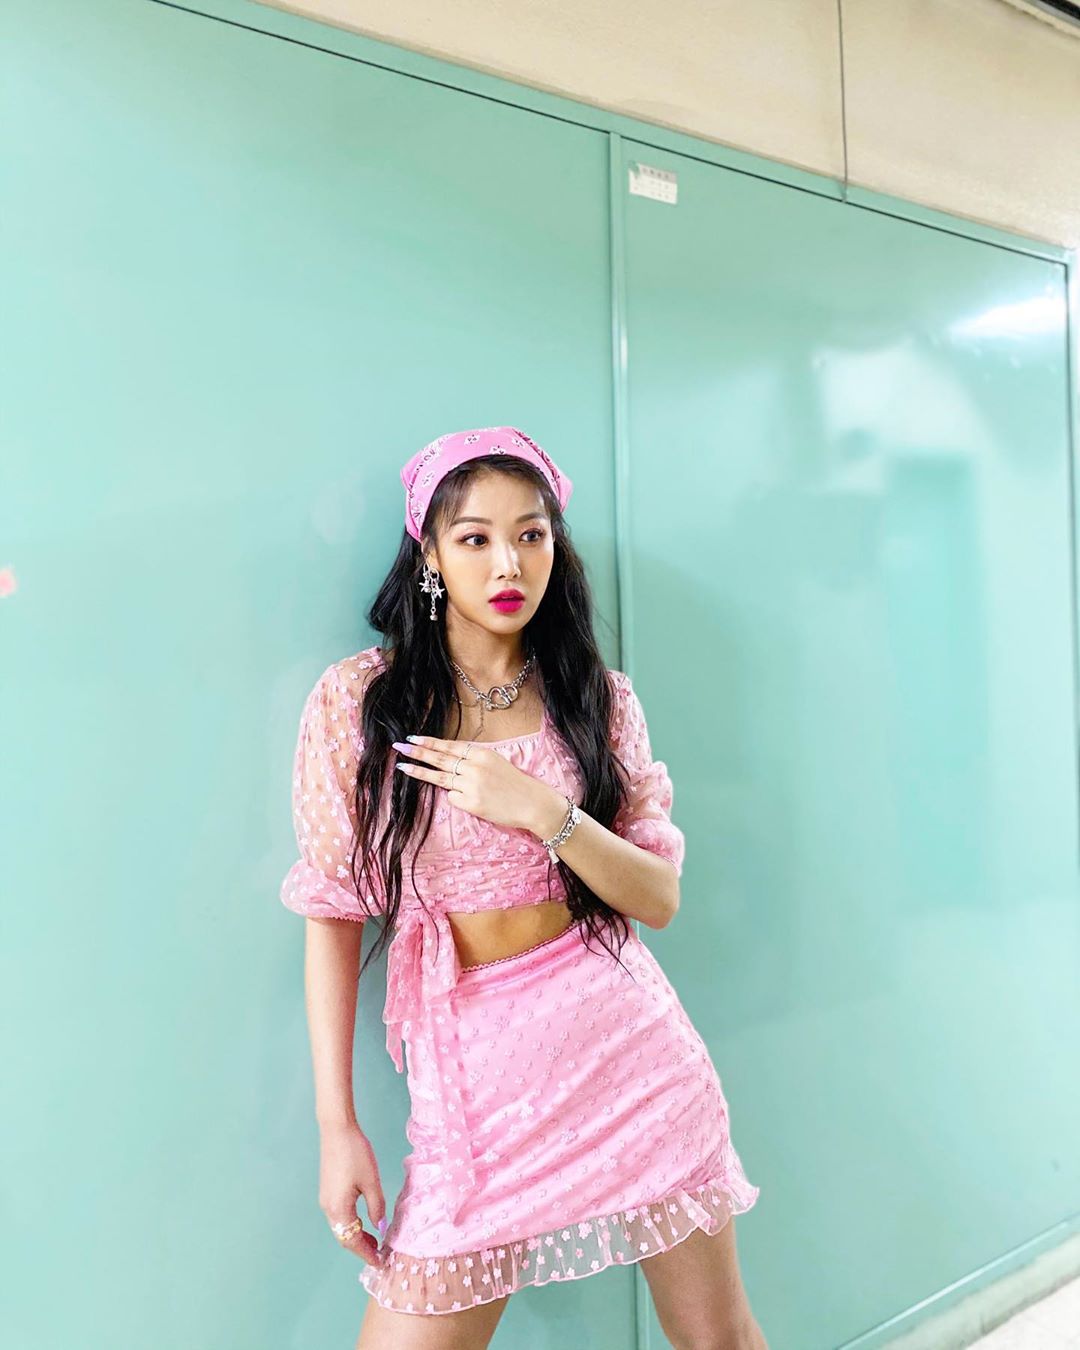 Yubin, a different stage